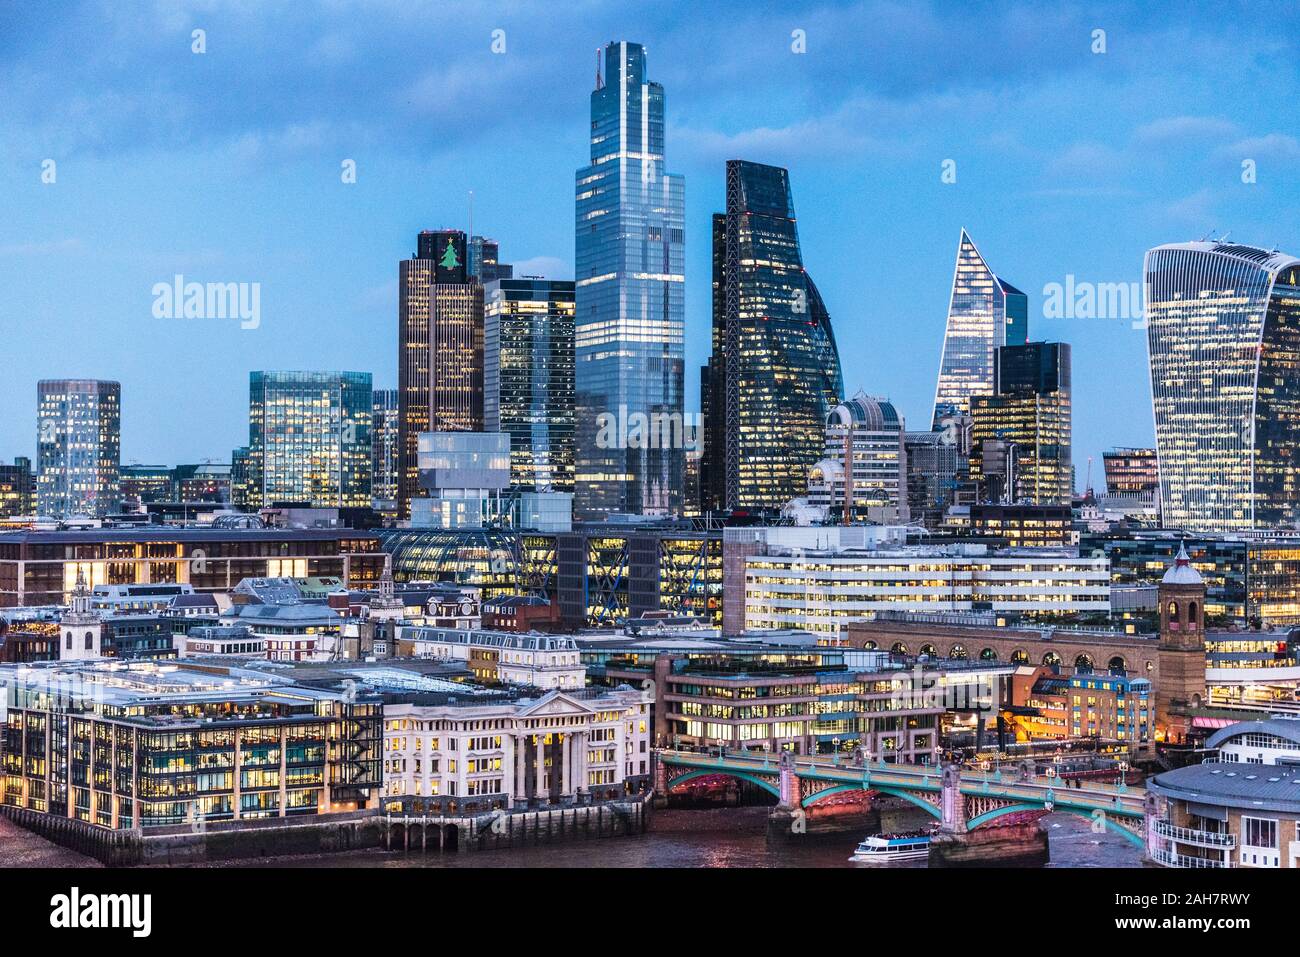 City of London Financial District at Dusk. London Square Mile. Stock Photo